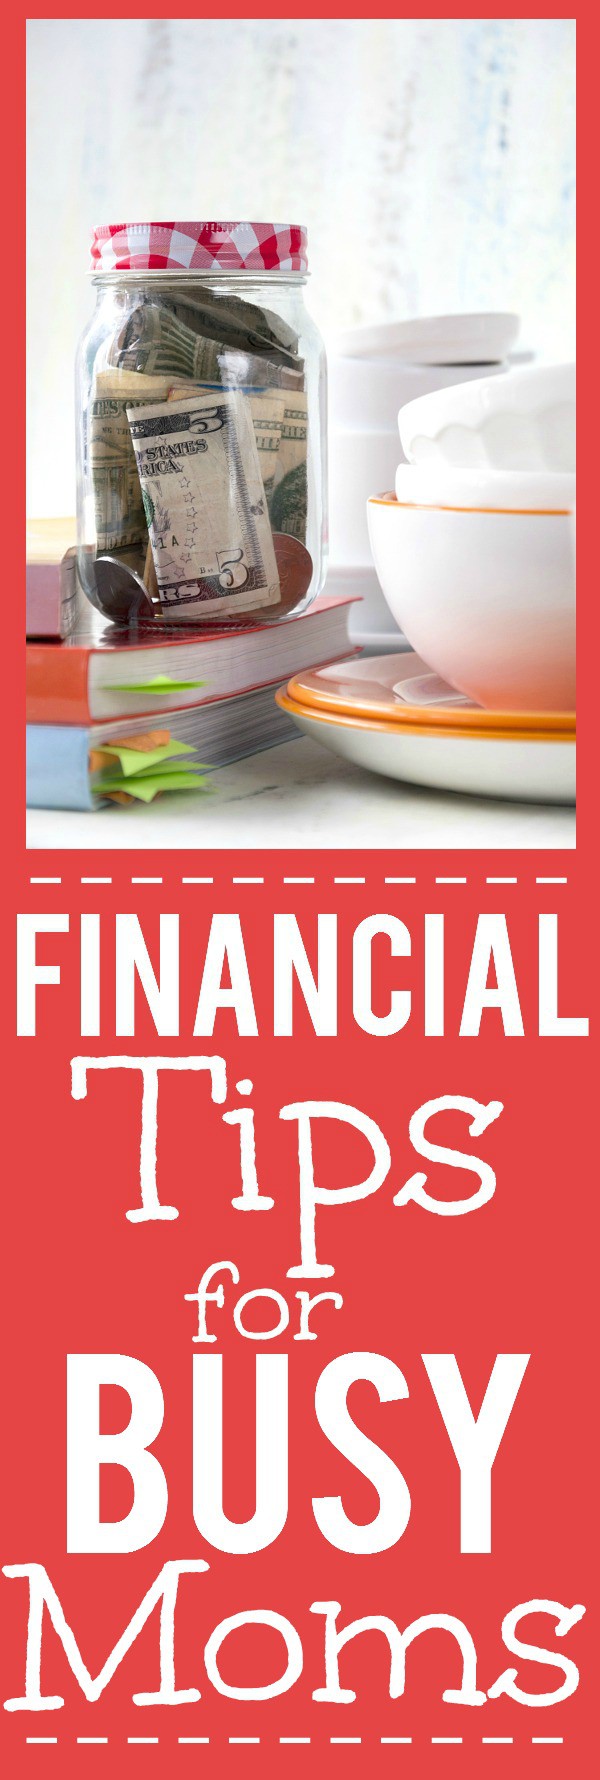 45 Financial Tips for the Busy Mom - Being a busy mom doesn't mean you should ignore the finances.  Get smart with your money, even when you're busy with these 45 clever Financial Tips for the Busy Mom.  Hmm... Some of these are pretty useful.